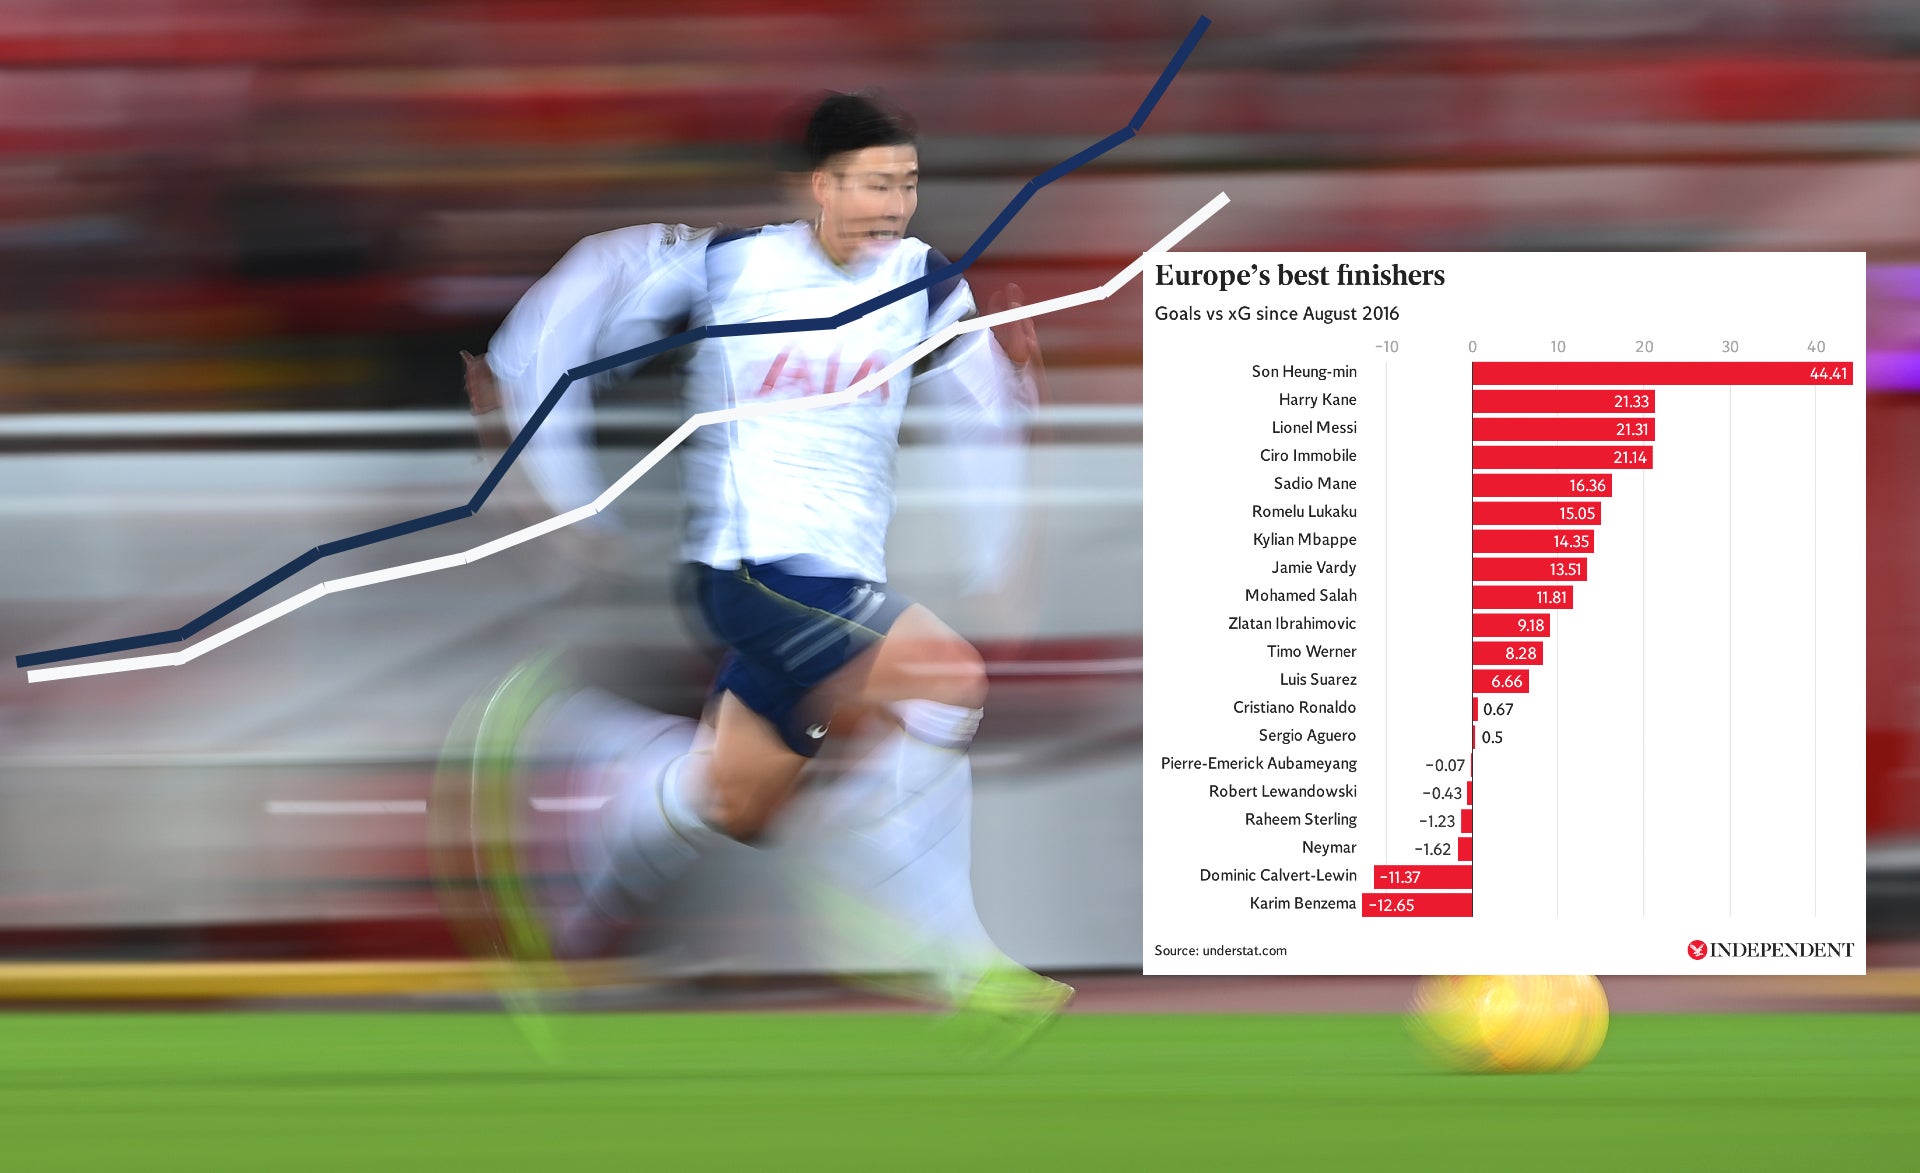 Son Heung-min has been outperforming his expected goals for five seasons